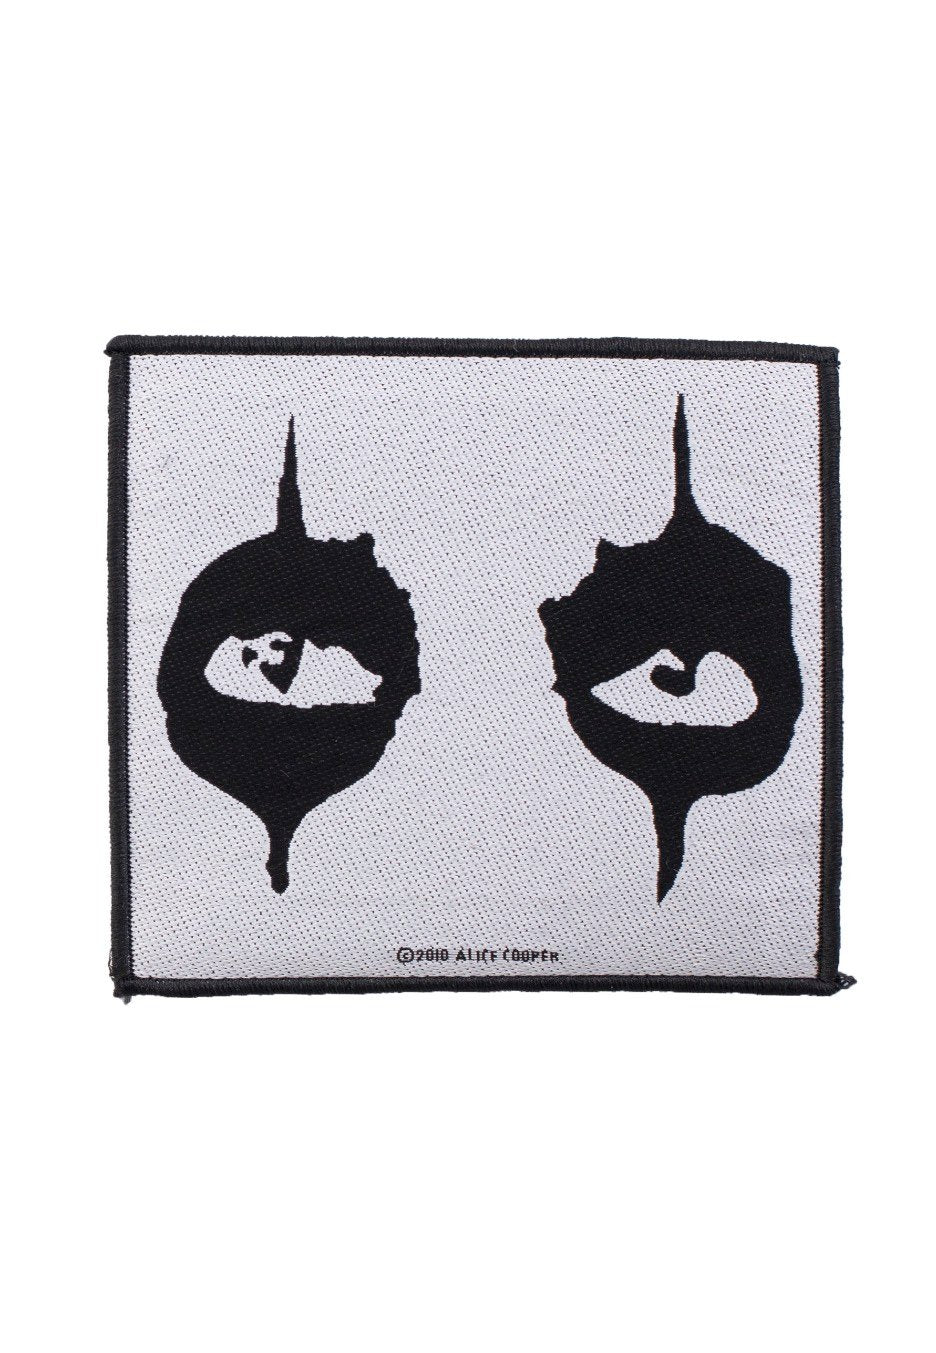 Alice Cooper - The Eyes - Patch